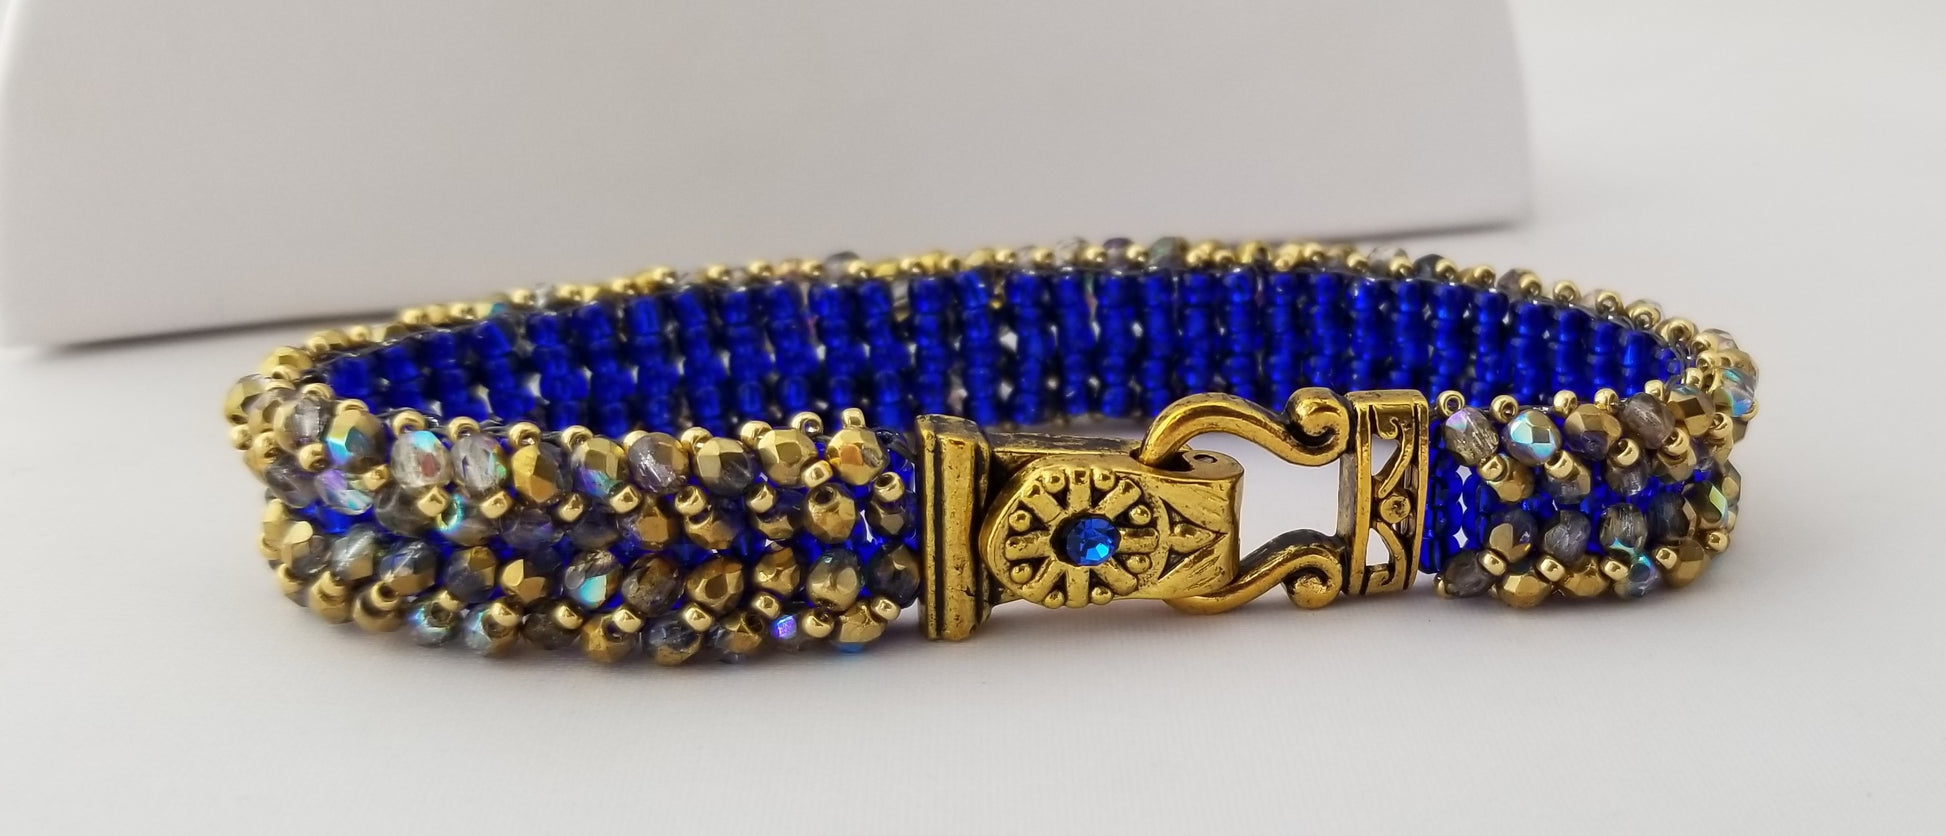 a blue and gold beaded bracelet with a lock